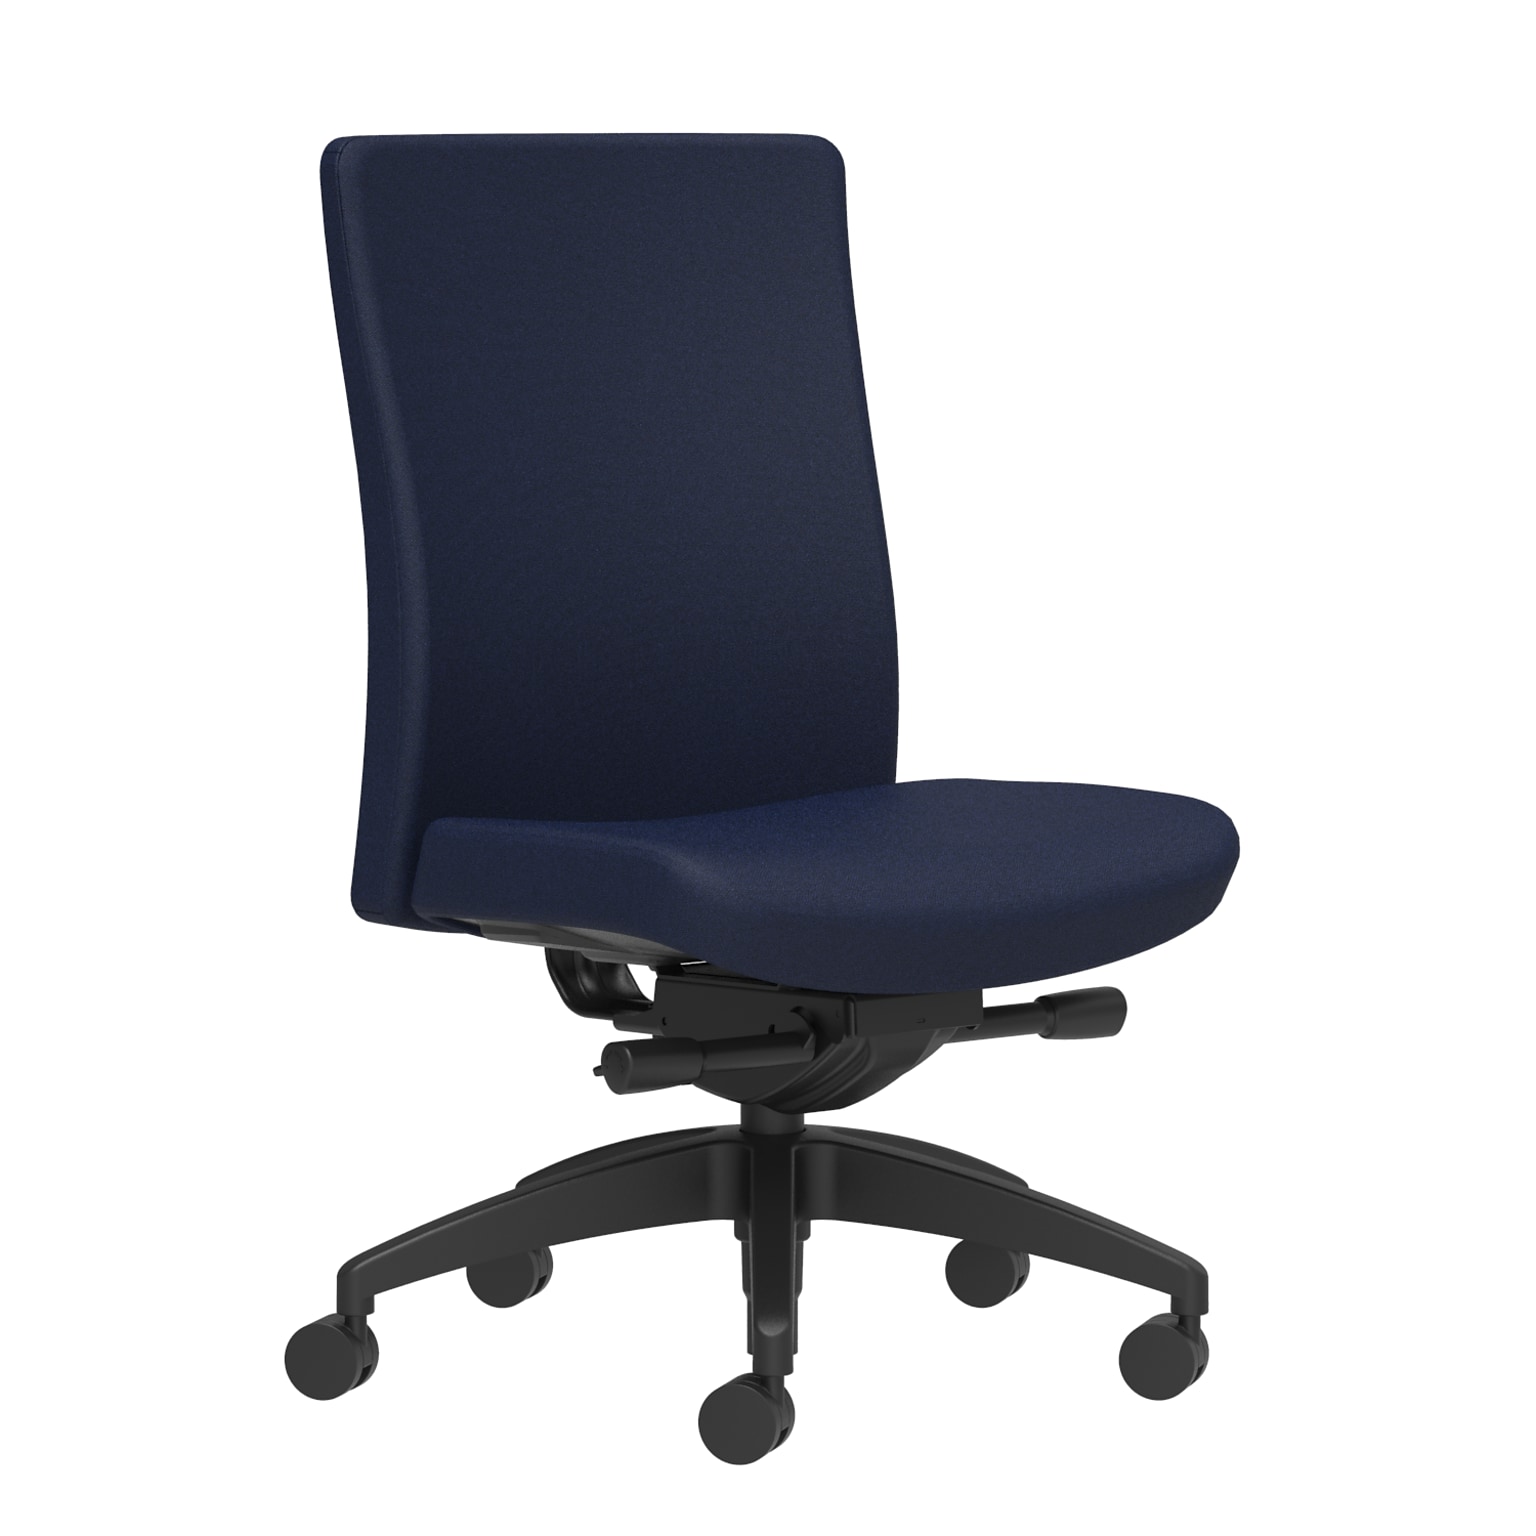 Union & Scale Workplace2.0™ Task Chair Upholstered, Armless, Navy Fabric, Synchro Tilt Seat Slide (54201)